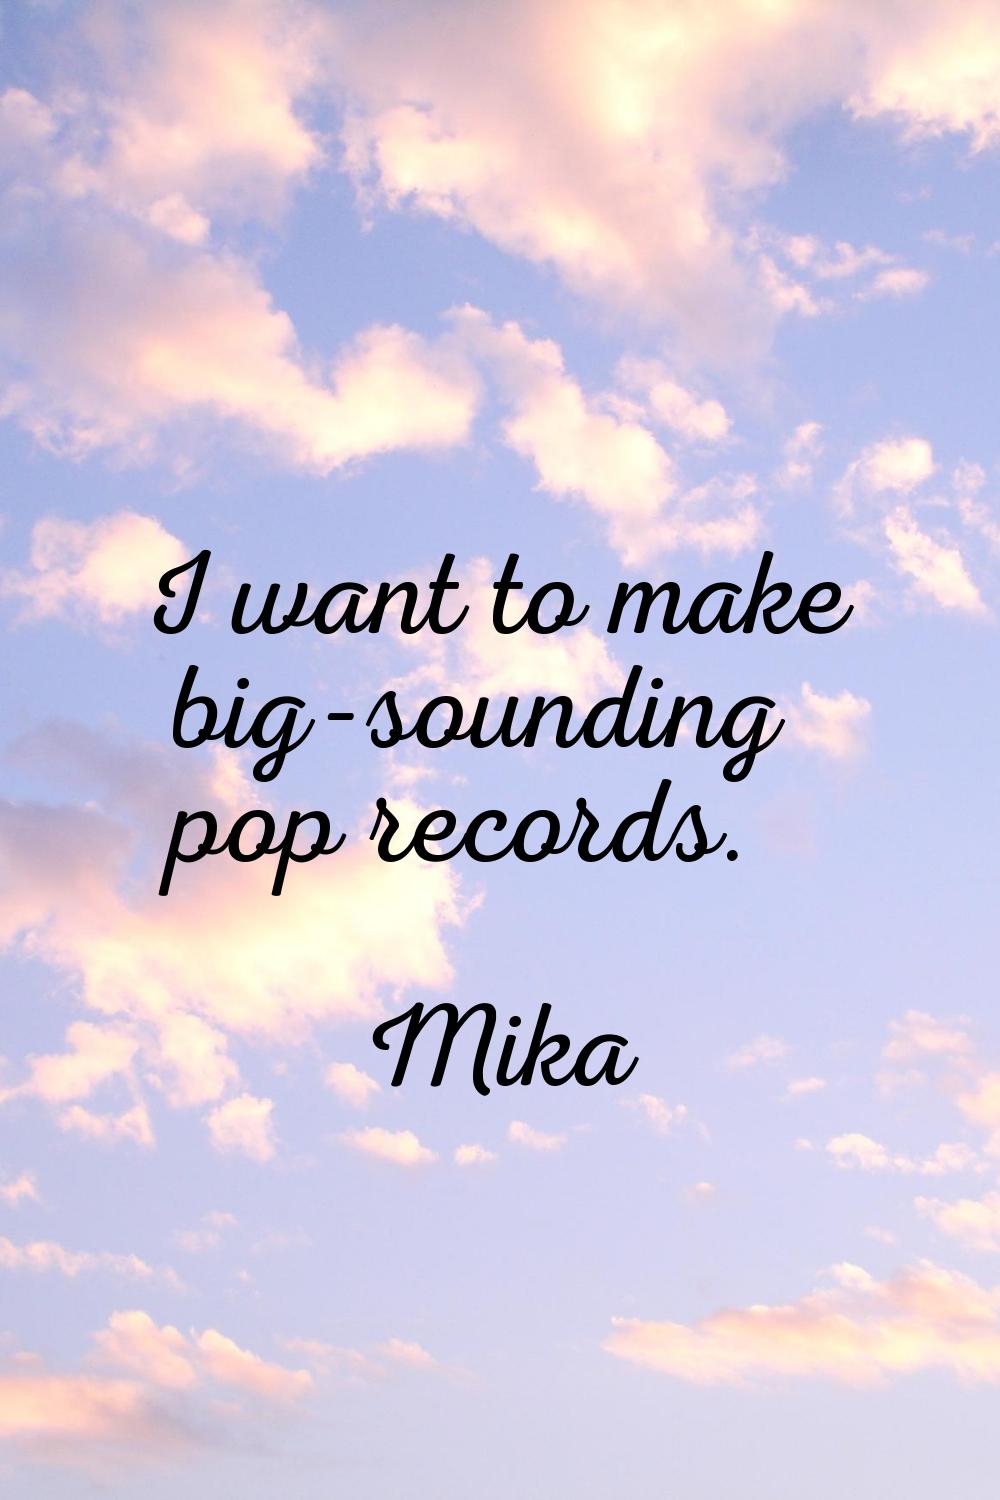 I want to make big-sounding pop records.